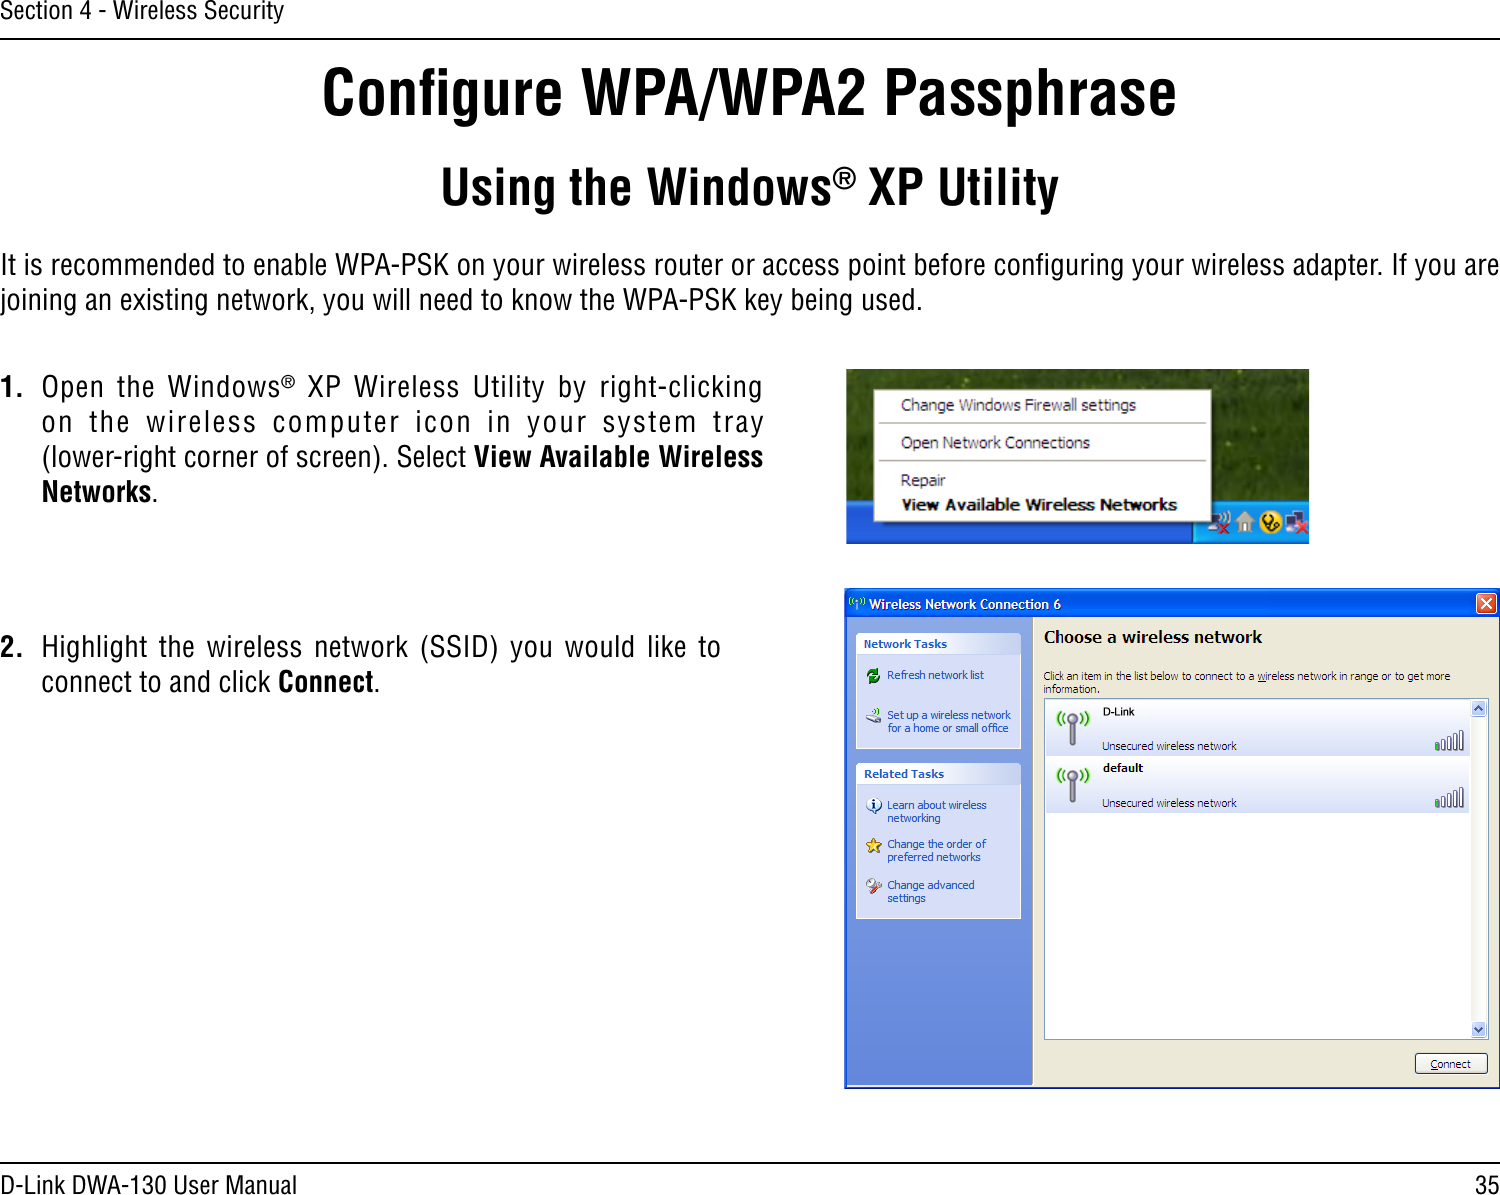 35D-Link DWA-130 User ManualSection 4 - Wireless SecurityConﬁgure WPA/WPA2 PassphraseUsing the Windows® XP UtilityIt is recommended to enable WPA-PSK on your wireless router or access point before conﬁguring your wireless adapter. If you are joining an existing network, you will need to know the WPA-PSK key being used.2.  Highlight  the  wireless  network  (SSID)  you  would  like  to connect to and click Connect.1.  Open  the  Windows®  XP  Wireless  Utility  by  right-clicking on  the  wireless  computer  icon  in  your  system  tray  (lower-right corner of screen). Select View Available Wireless Networks. 